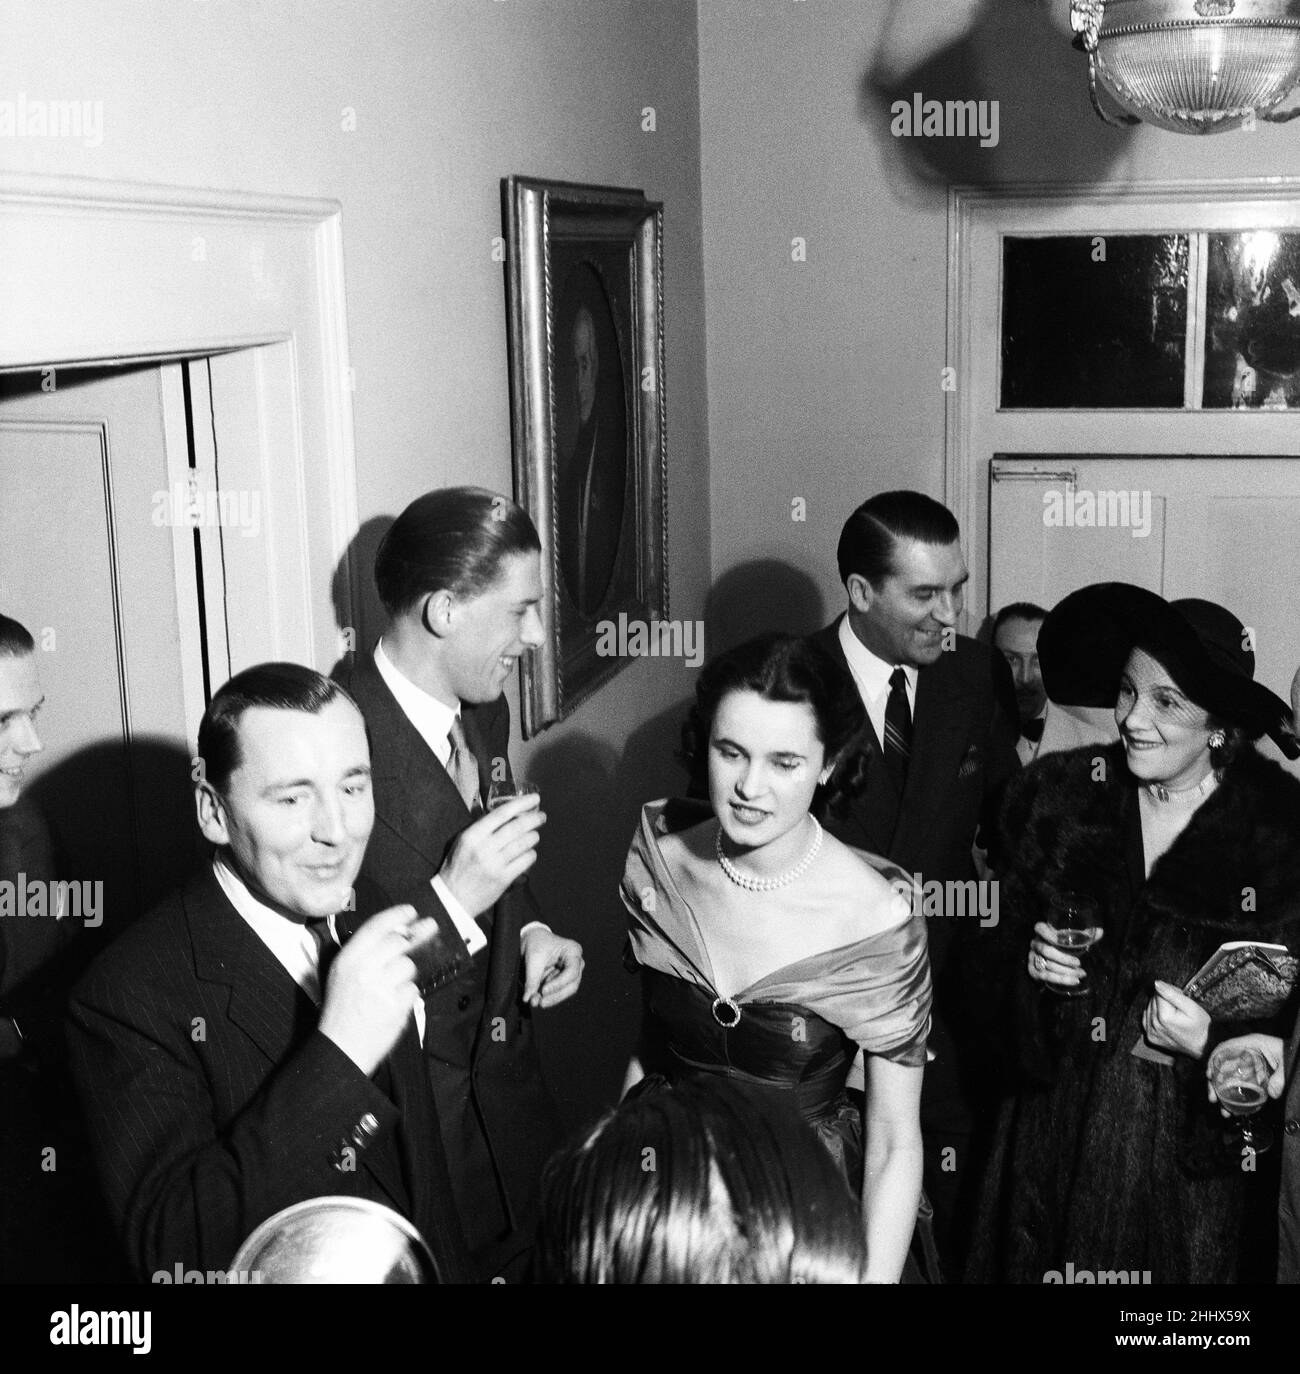 George Henry Hubert Lascelles, 7th Earl of Harewood, & Countess of Harewood hold cocktail party to celebrate the birth of the Earl's magazine Opera, pictured February 1950.   The party was held at the home of 'Opera' art editor, Richard Burkle, at Bloomfield terrace London.   Also pictured:  Joan Cross opera singer Benjamin Britten composer Stock Photo